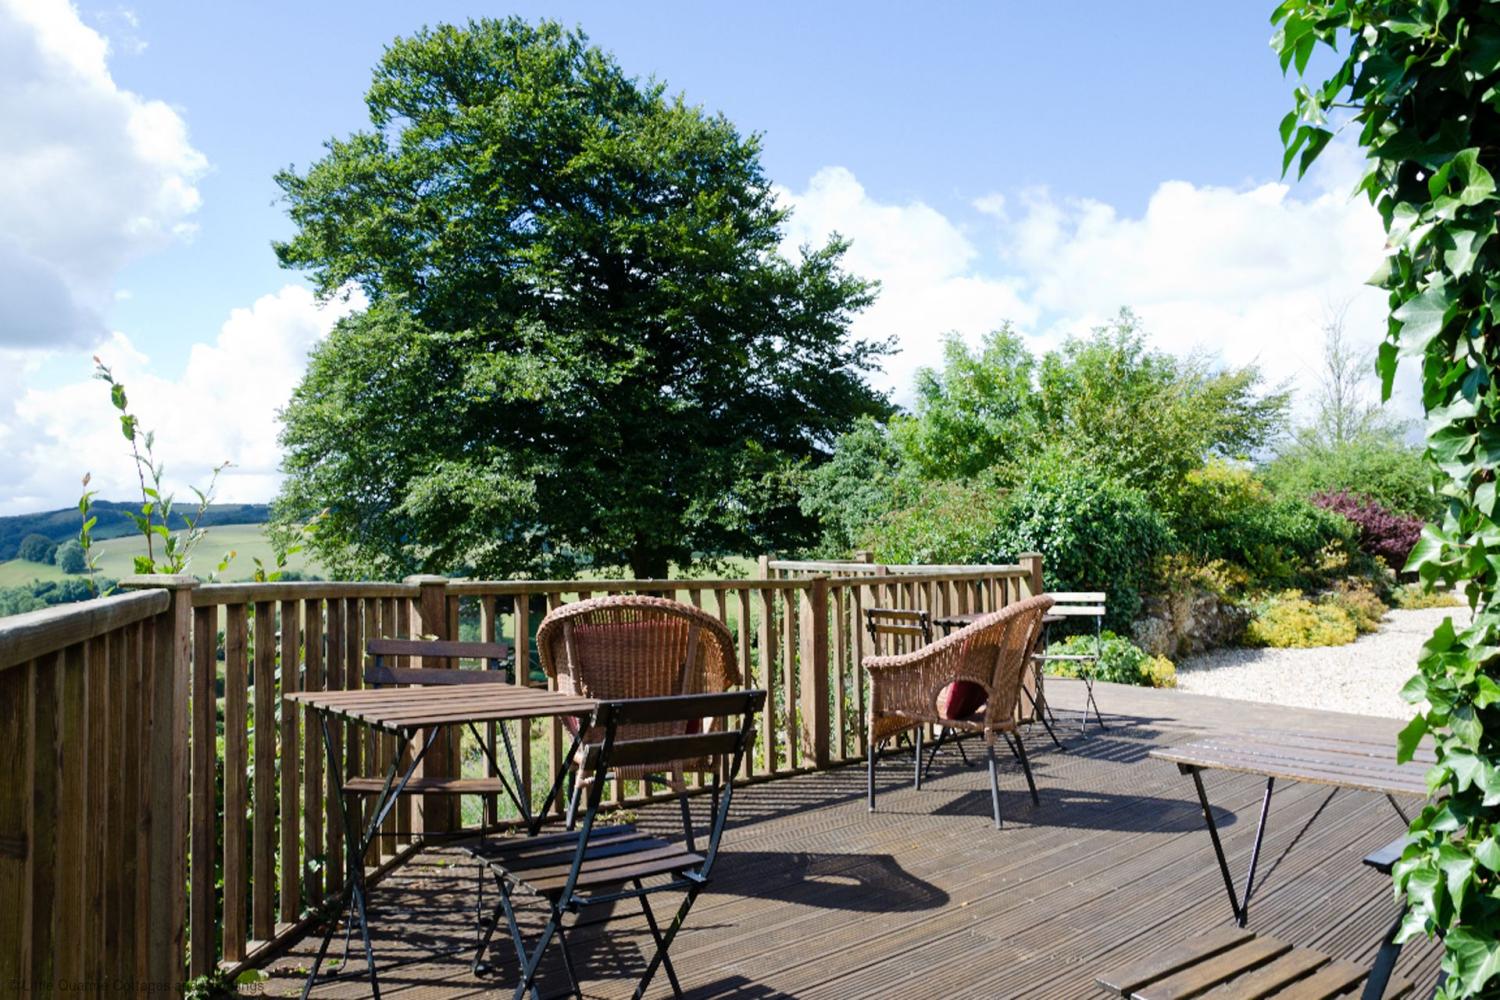 The decking area around the barn - perfect for an early morning tea or early evening G & T!